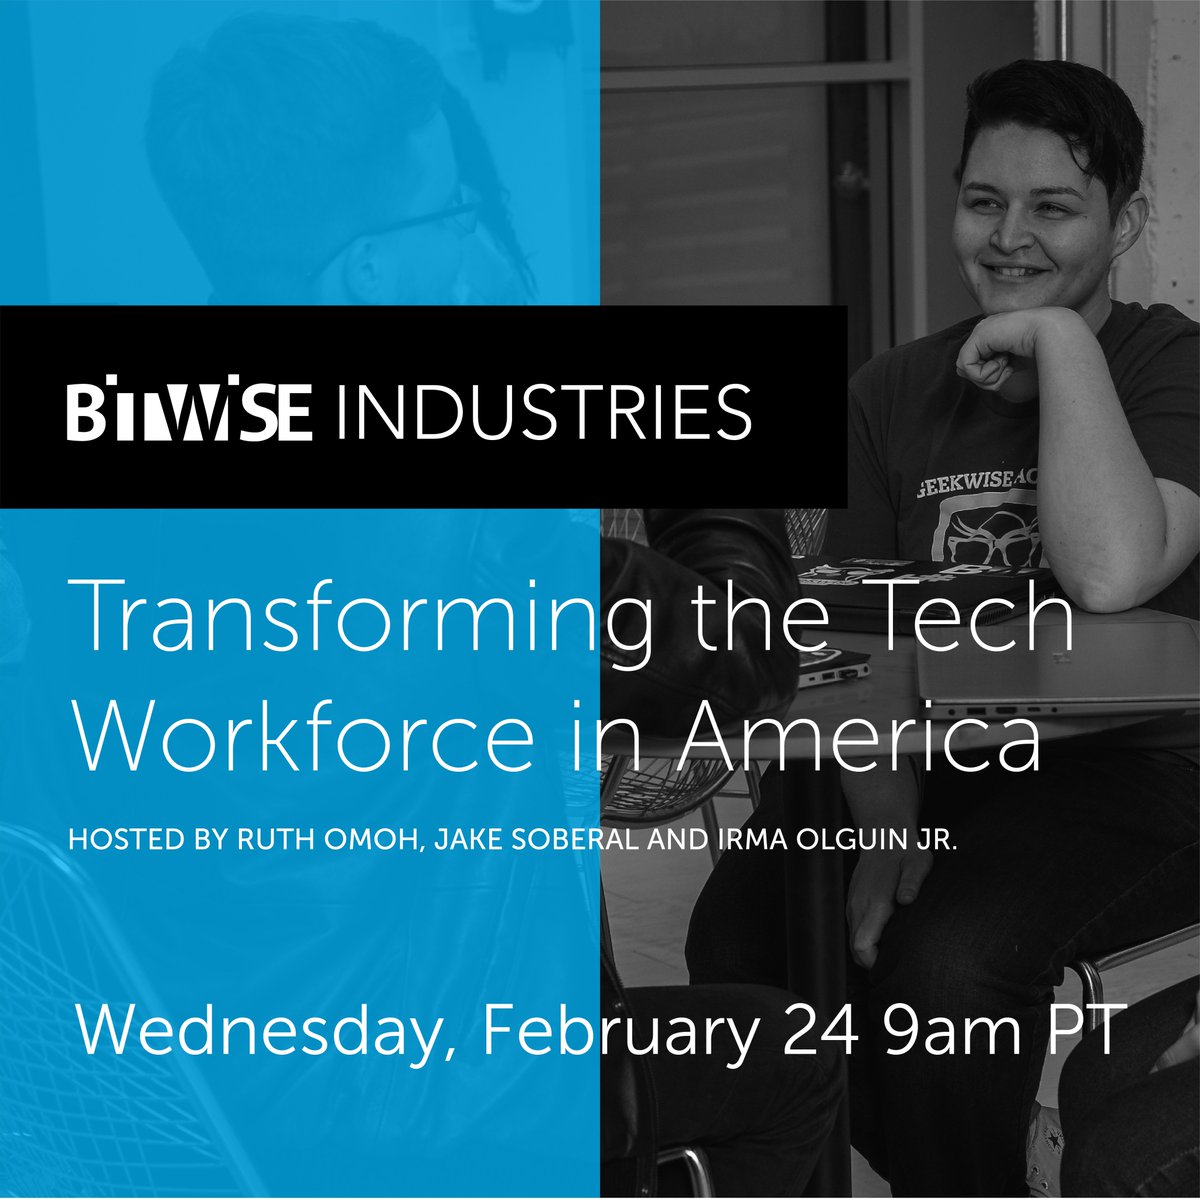 Join us tomorrow, February 24 at 9am PT for Transforming the Tech Workforce in America: Hosted by @ruthumohnews, with @jakeasoberal and @irms!

RSVP! ➡️ bit.ly/tech224 (1/2)